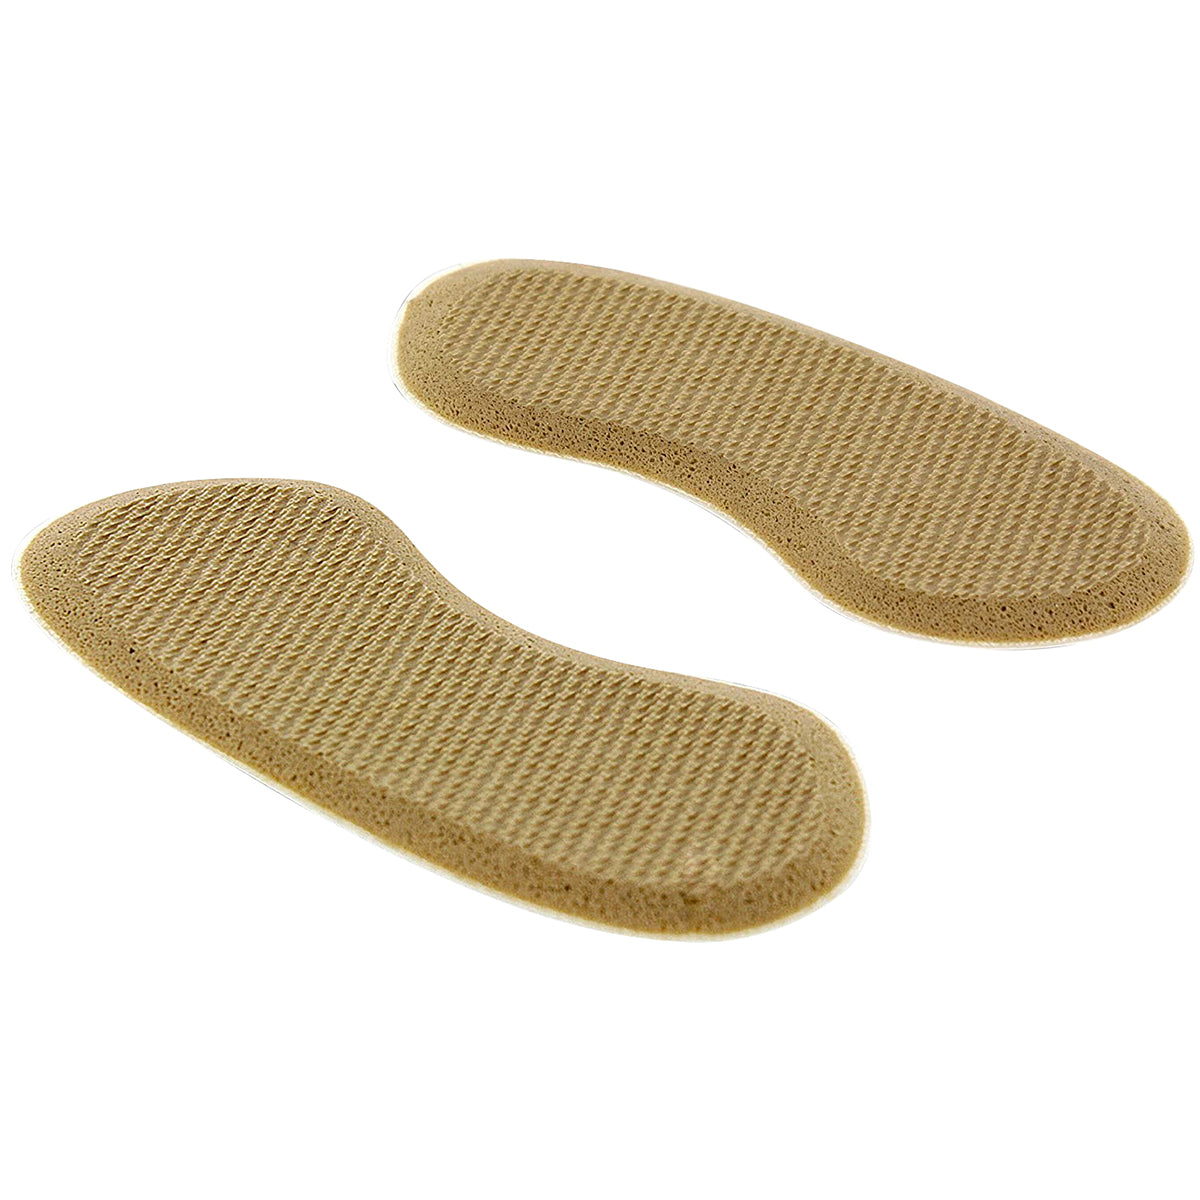 Sof Sole Heel Liner Comfort Shoe Insole Cushions - 2 Pack SofSole